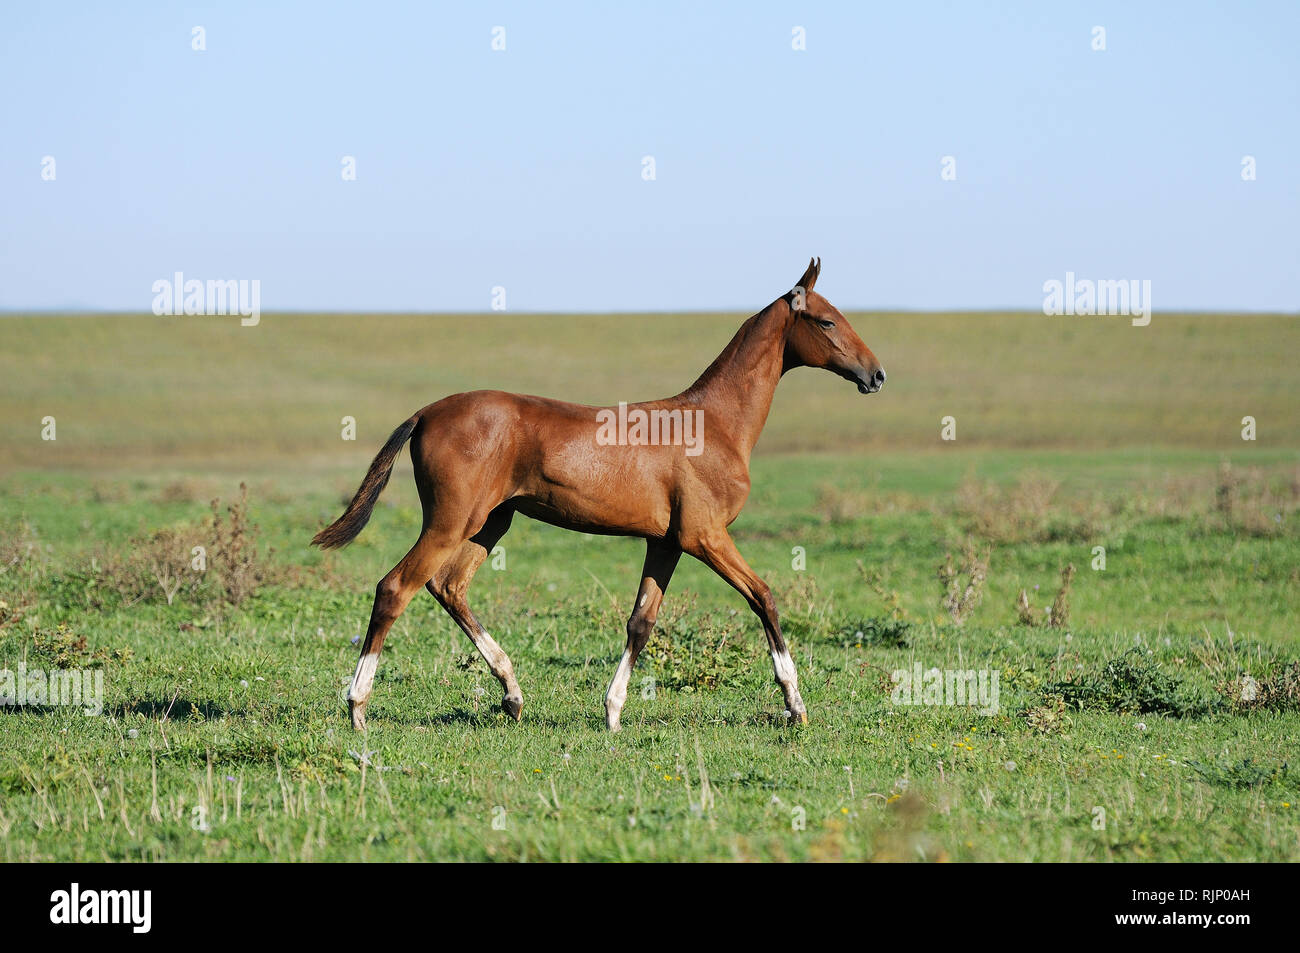 Young chestnut akhal teke foal trotting through steppe. Horizontal, side view, in motion. Stock Photo